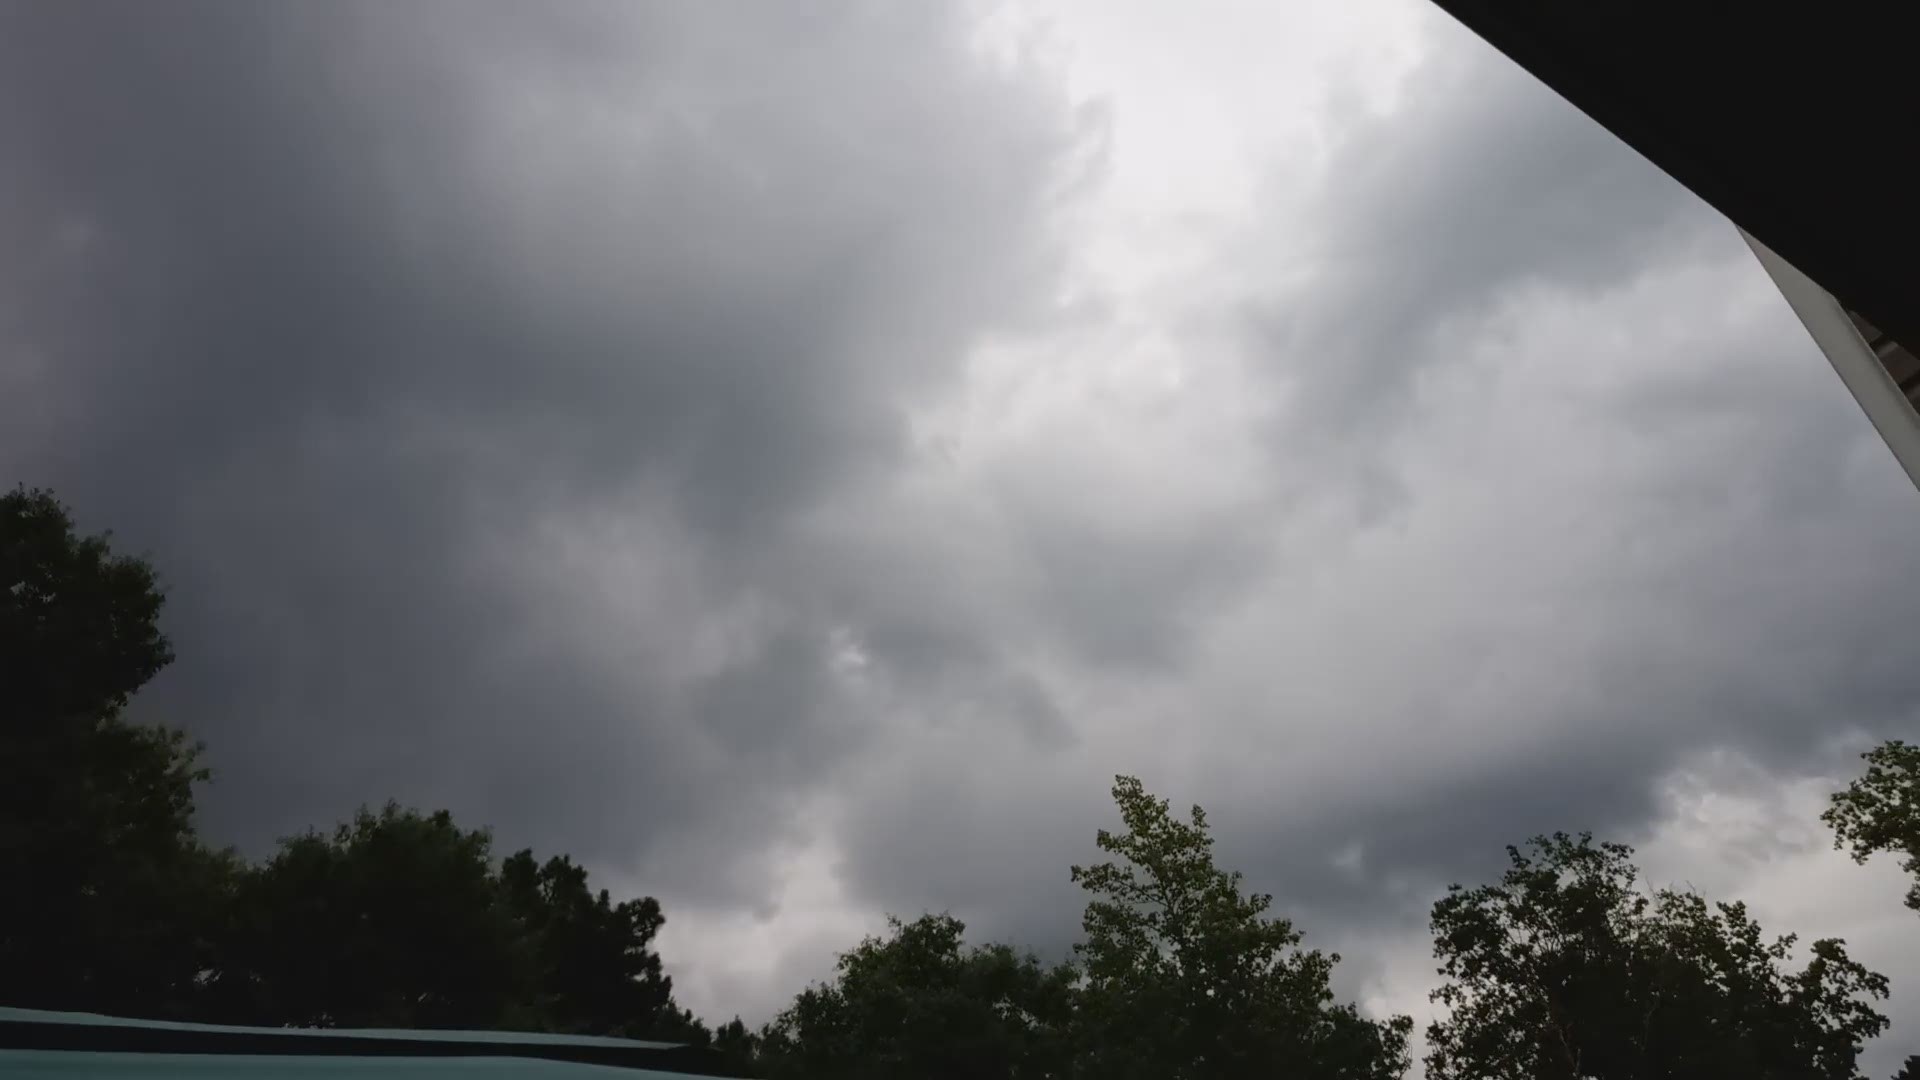 Lisa Renee Ostrander captured these clouds rolling over Monroe, Georgia on Thursday, June 20, 2019.